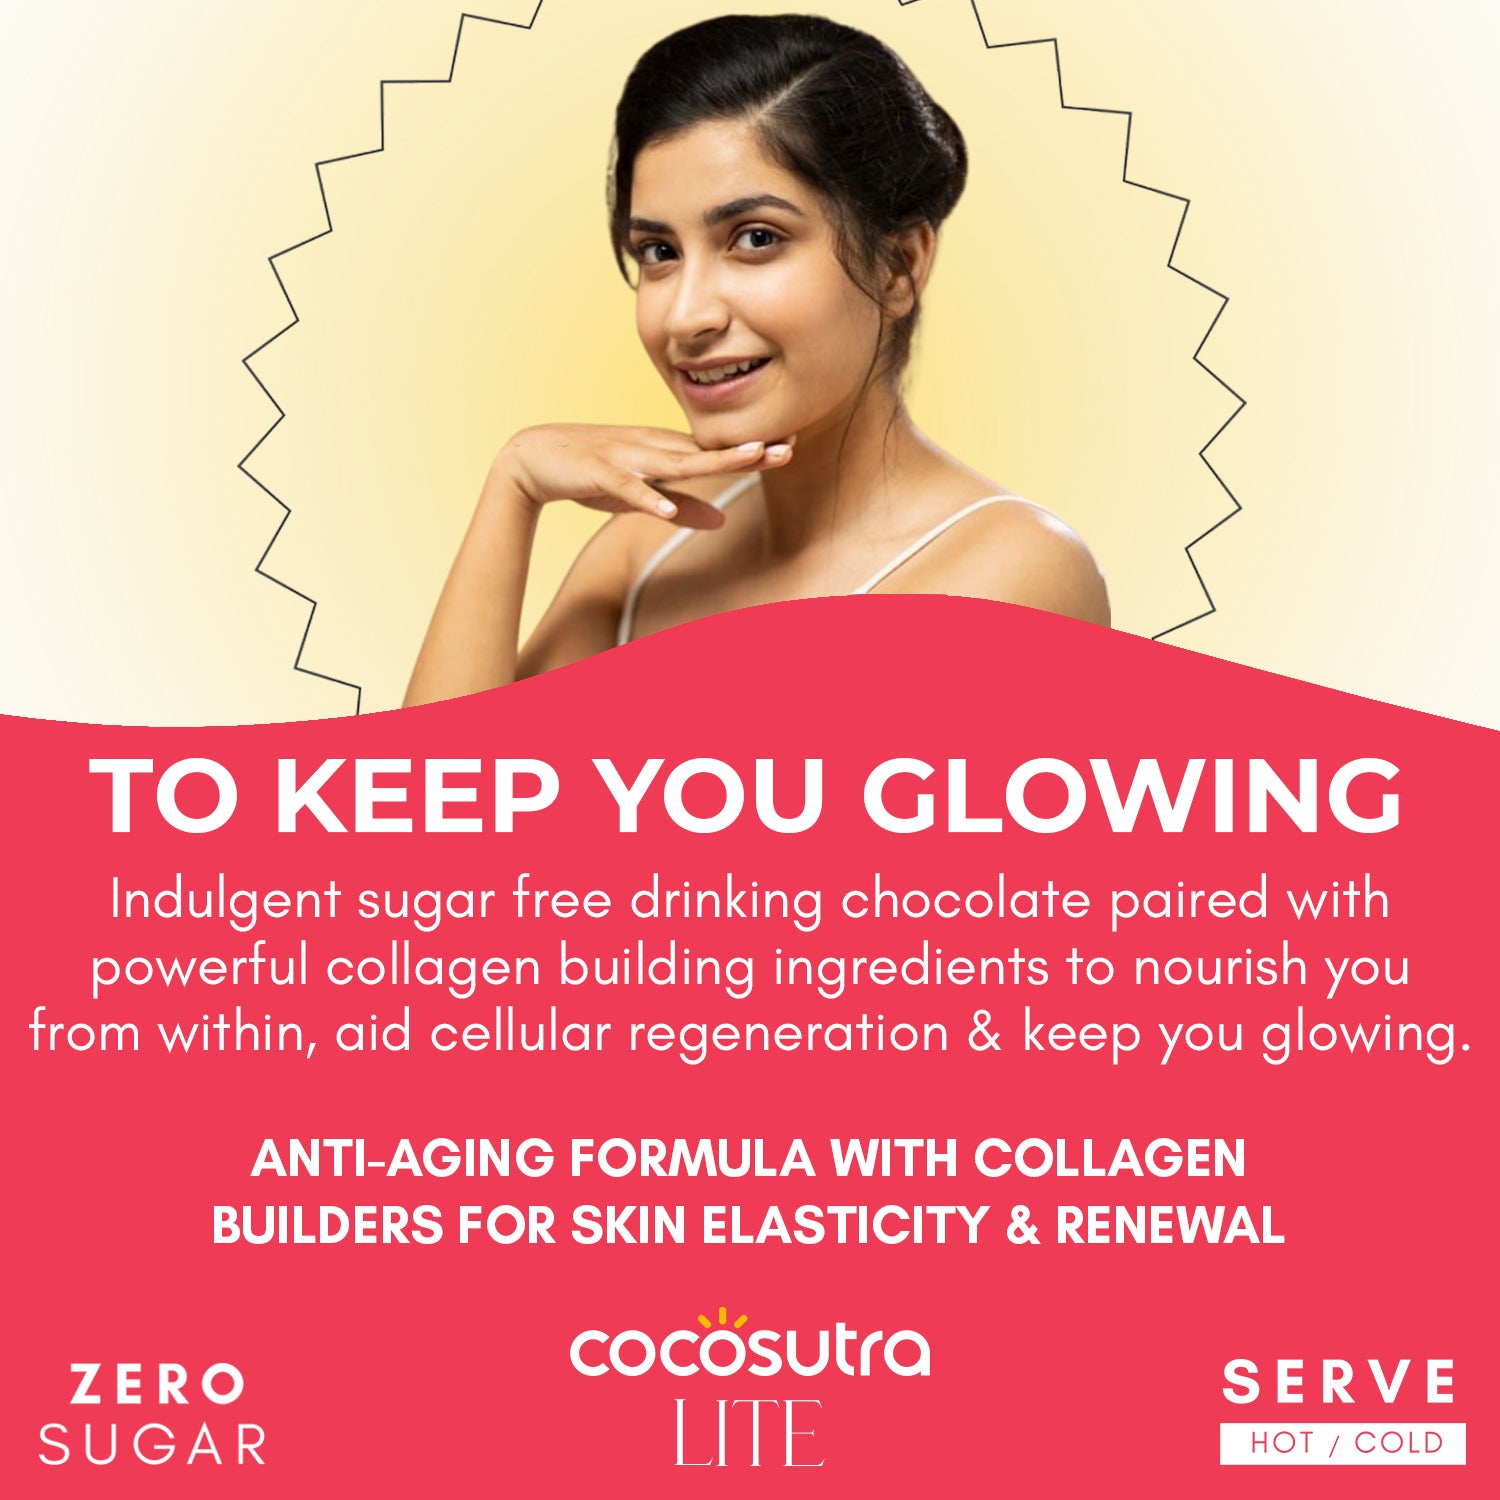 Cocosutra Glow - Sugar Free Drinking Chocolate Mix - Anti-Aging Supplement - Benefits